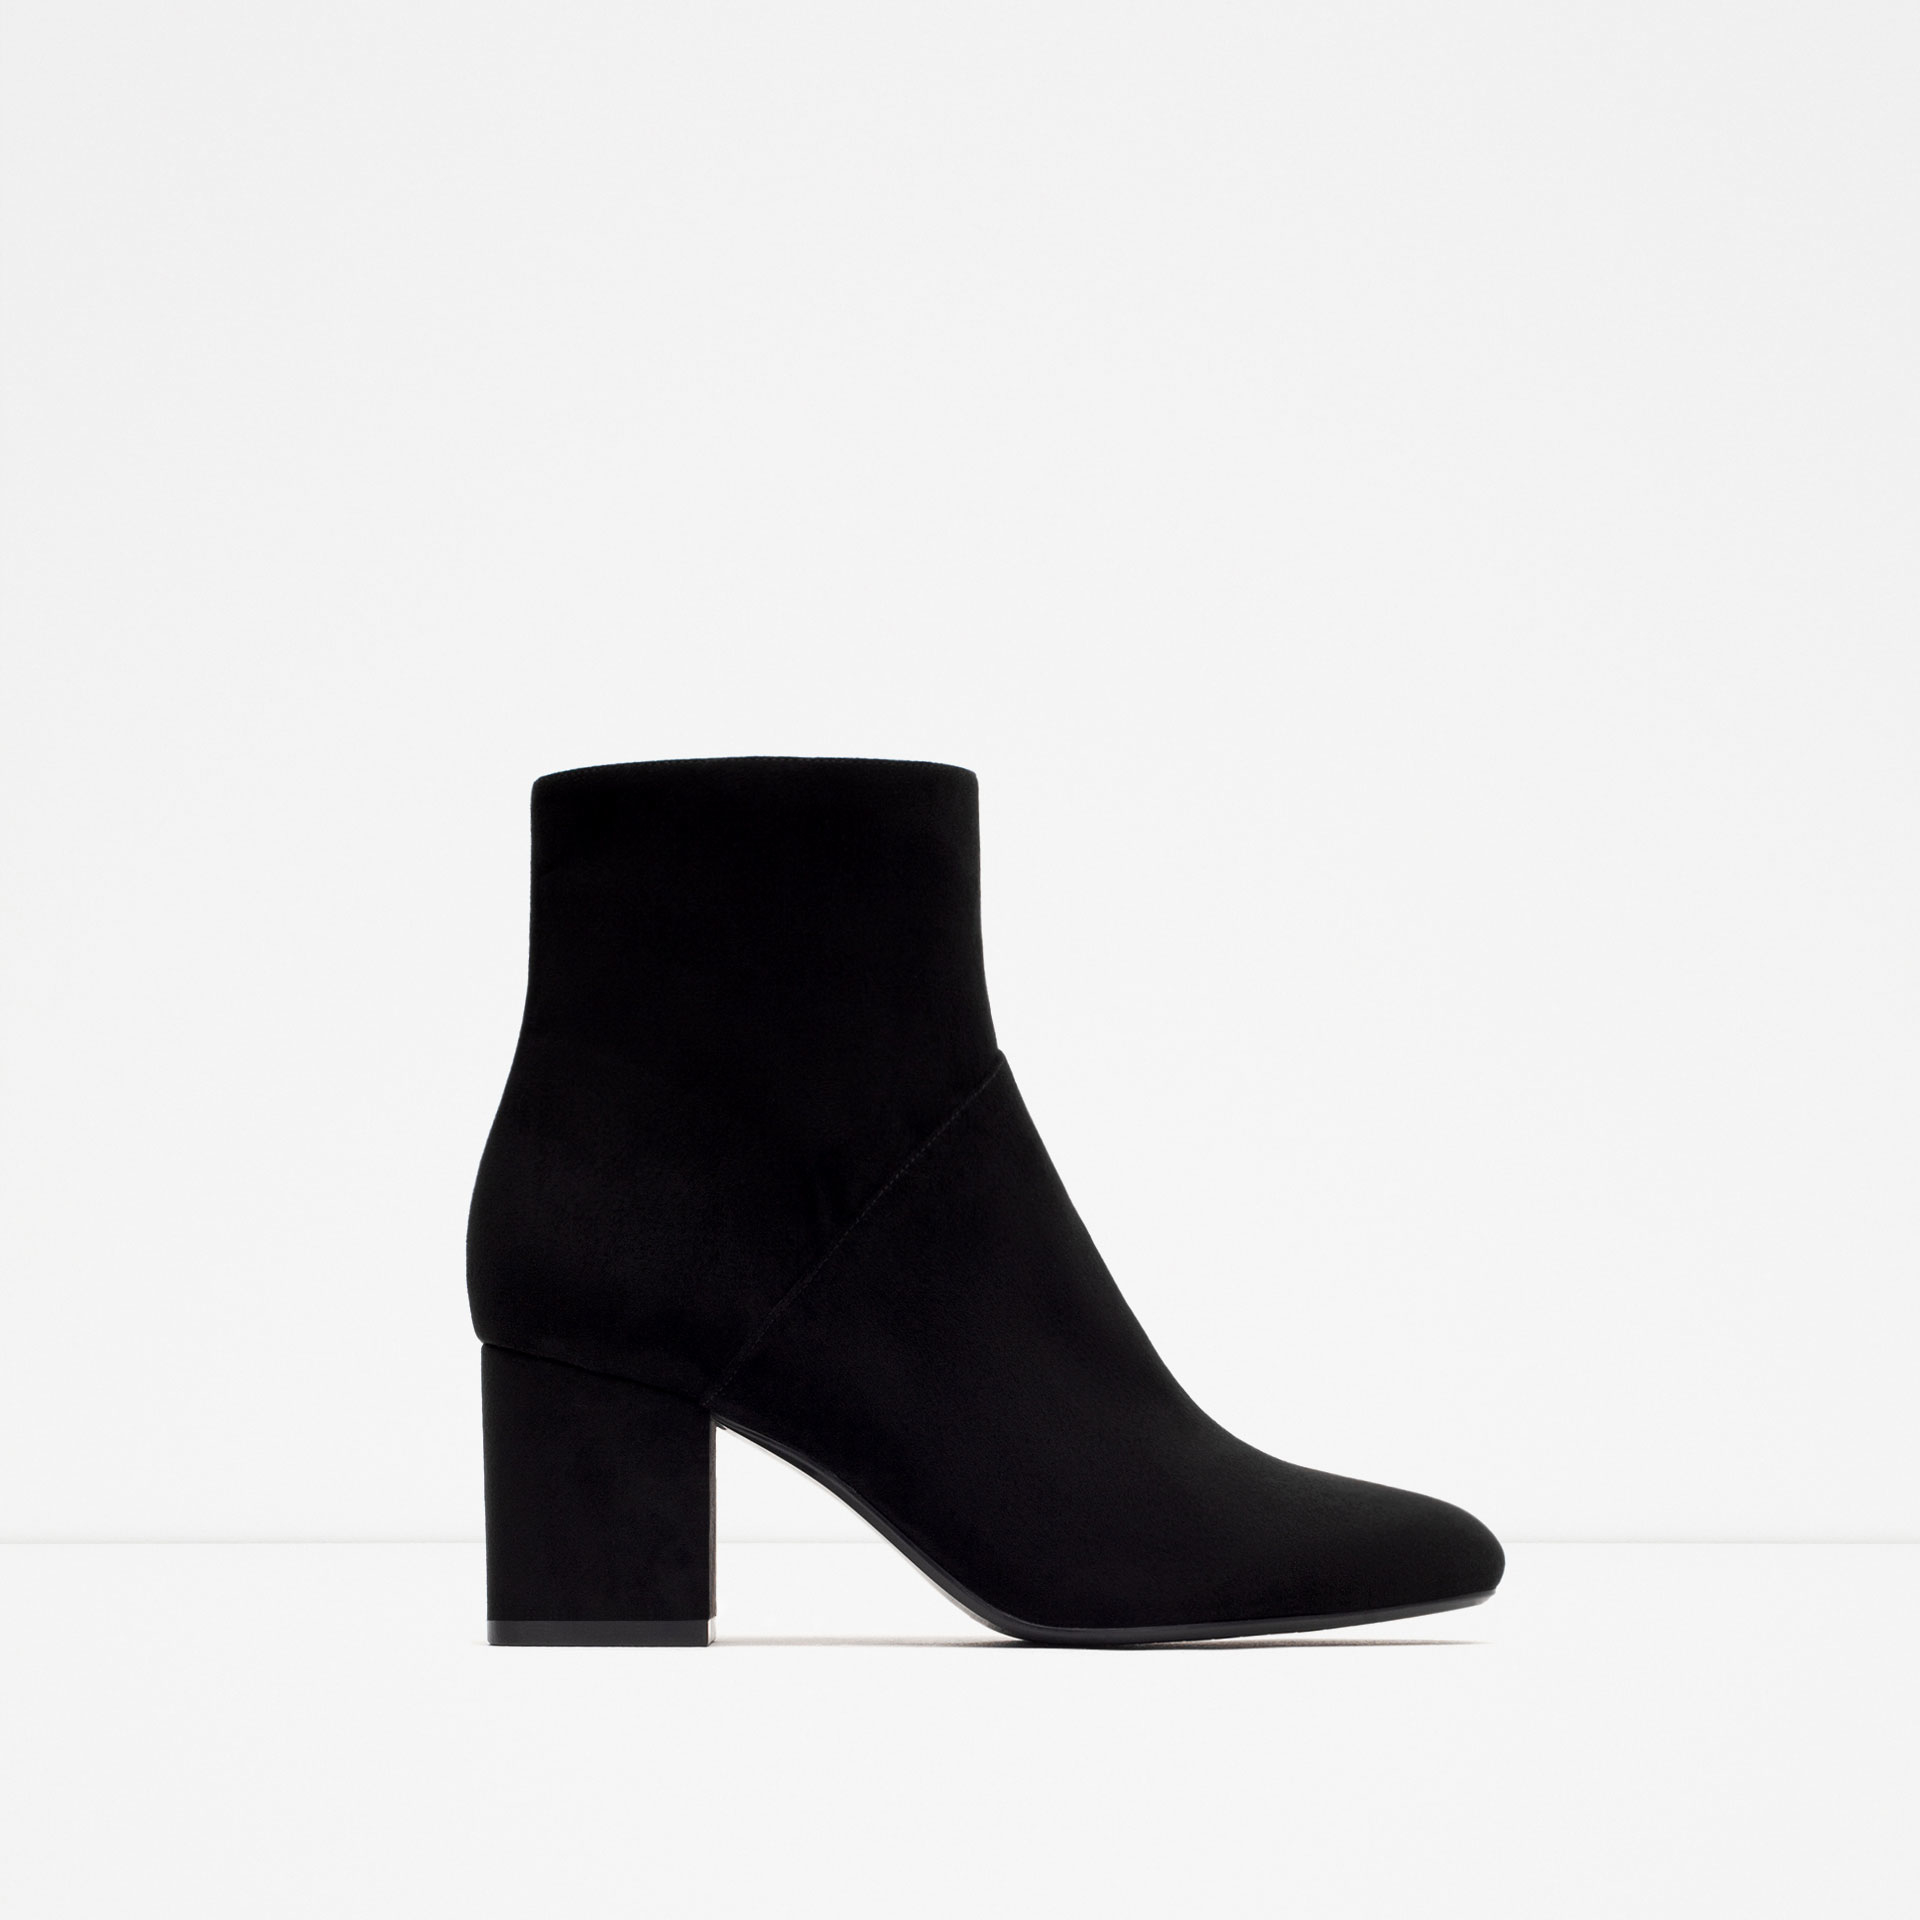 Zara High Heel Pointed Ankle Boots in Black | Lyst